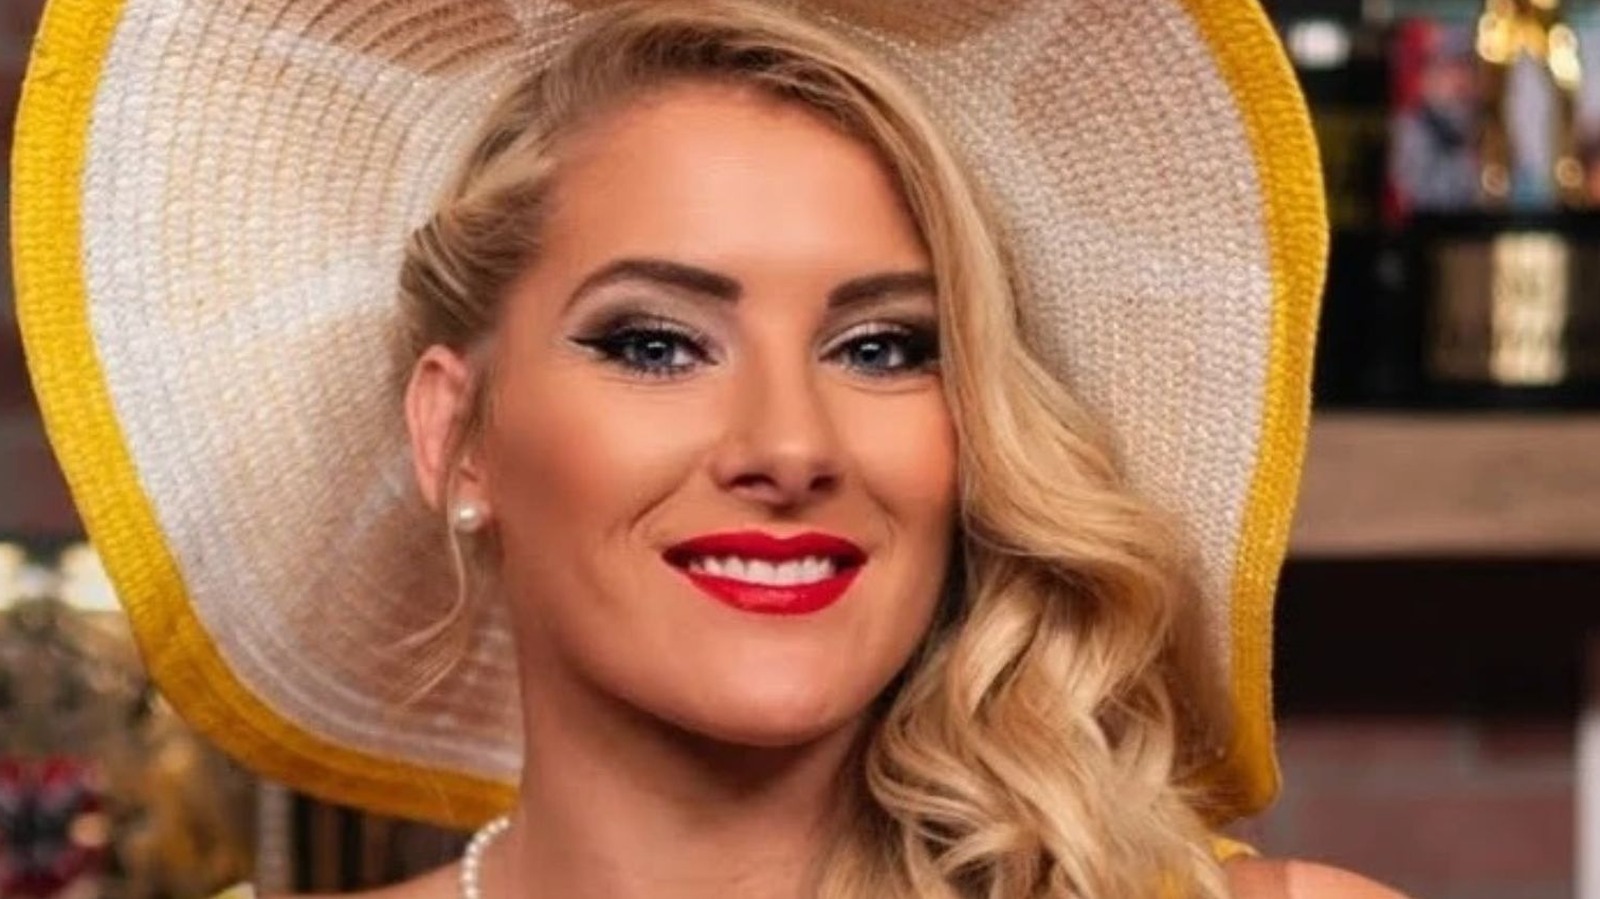 Lacey Evans’ social media activity indicates that she has left WWE